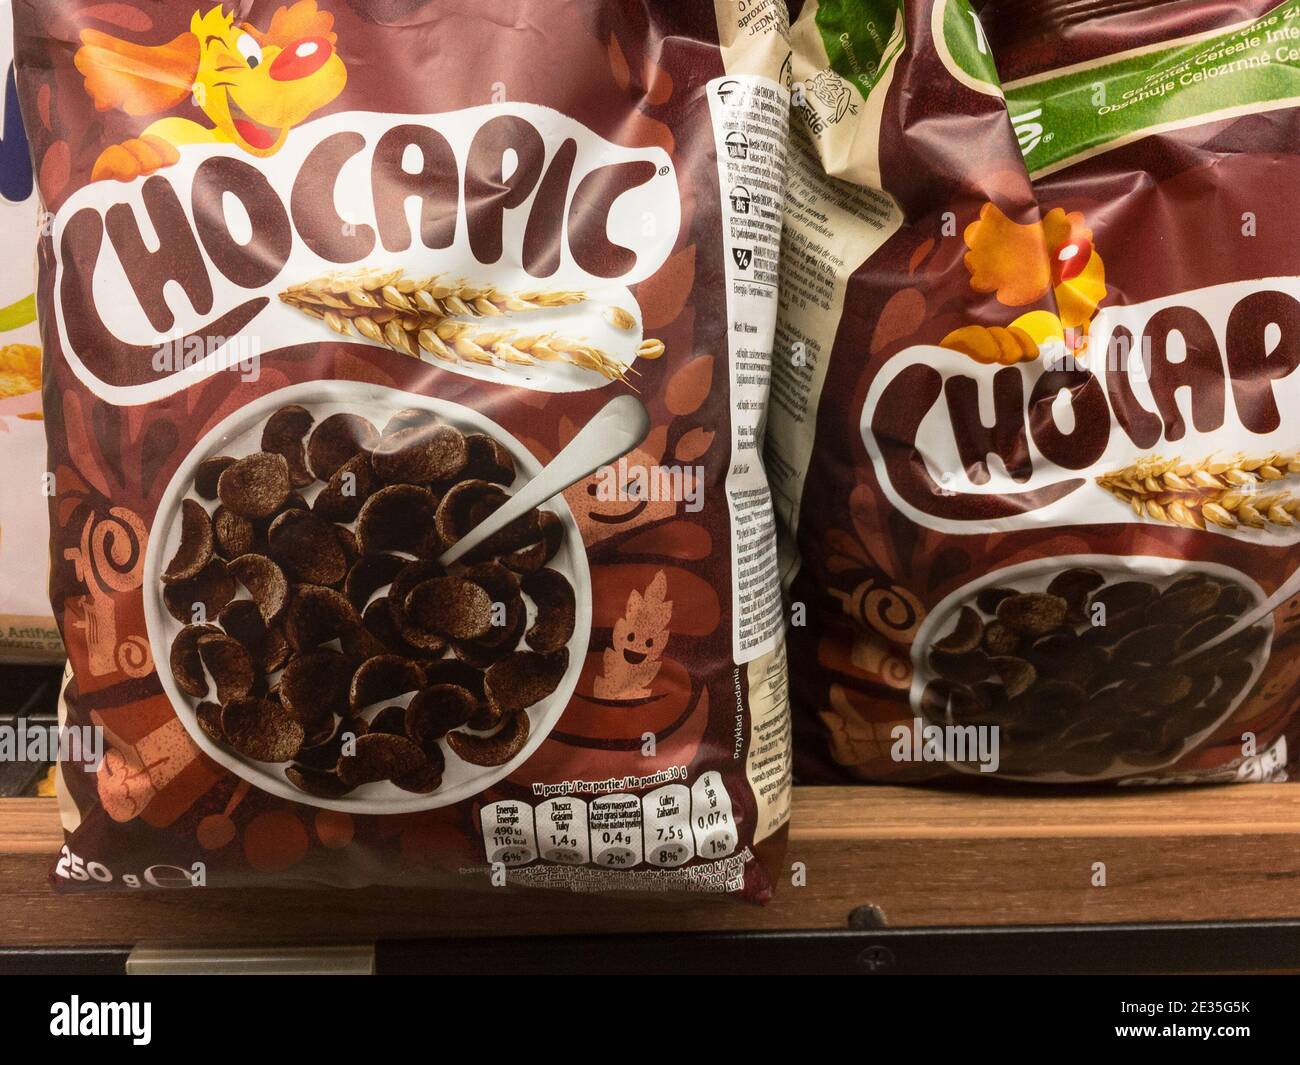 BELGRADE, SERBIA - JANUARY 10, 2021: Chocapic logo on boxes of Cereal for  sale. Part of Nestle, Chocapic is a brand of chocolate flavoured whole  grain Stock Photo - Alamy